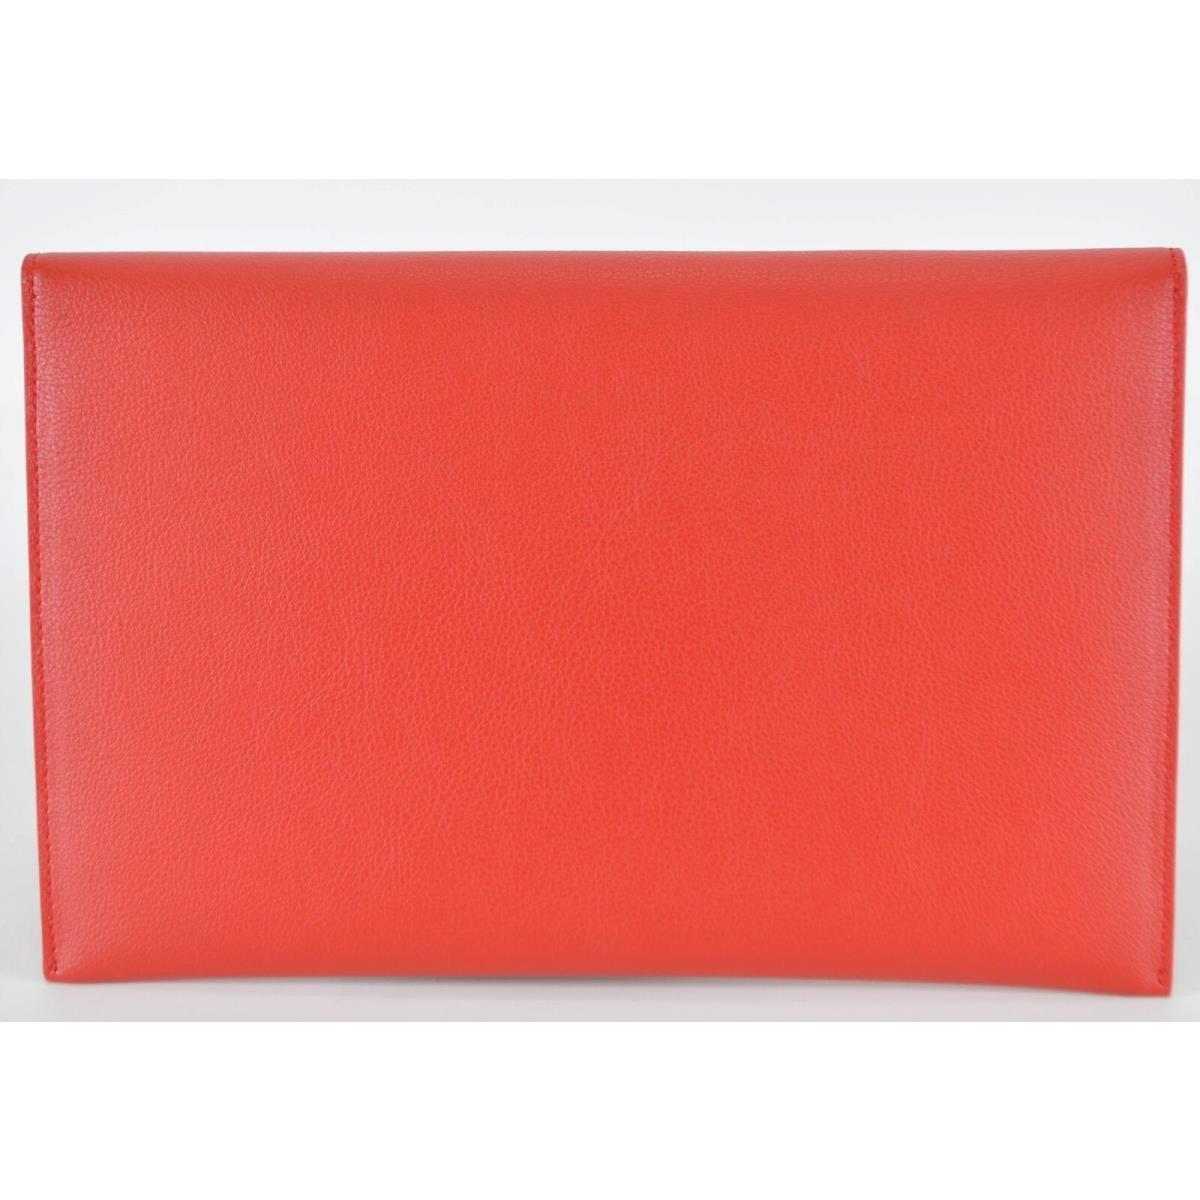 Alexander Mcqueen Soft Red Leather Skull Clasp Envelope Clutch Purse